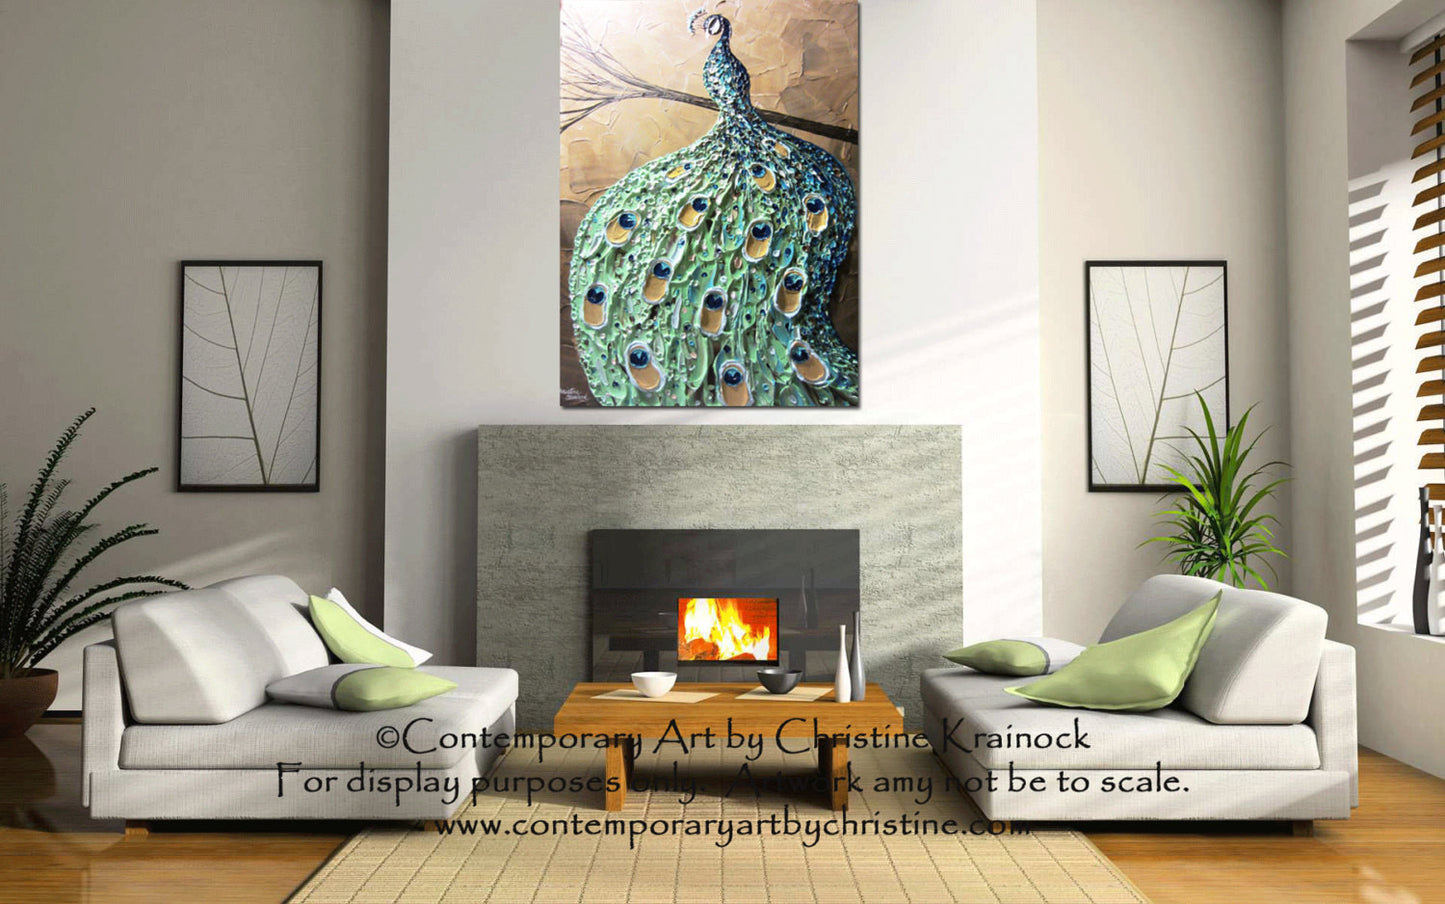 Load image into Gallery viewer, CUSTOM Abstract Painting Peacock Textured Contemporary Art Blue Green Gold MADE to ORDER - Christine Krainock Art - Contemporary Art by Christine - 2
